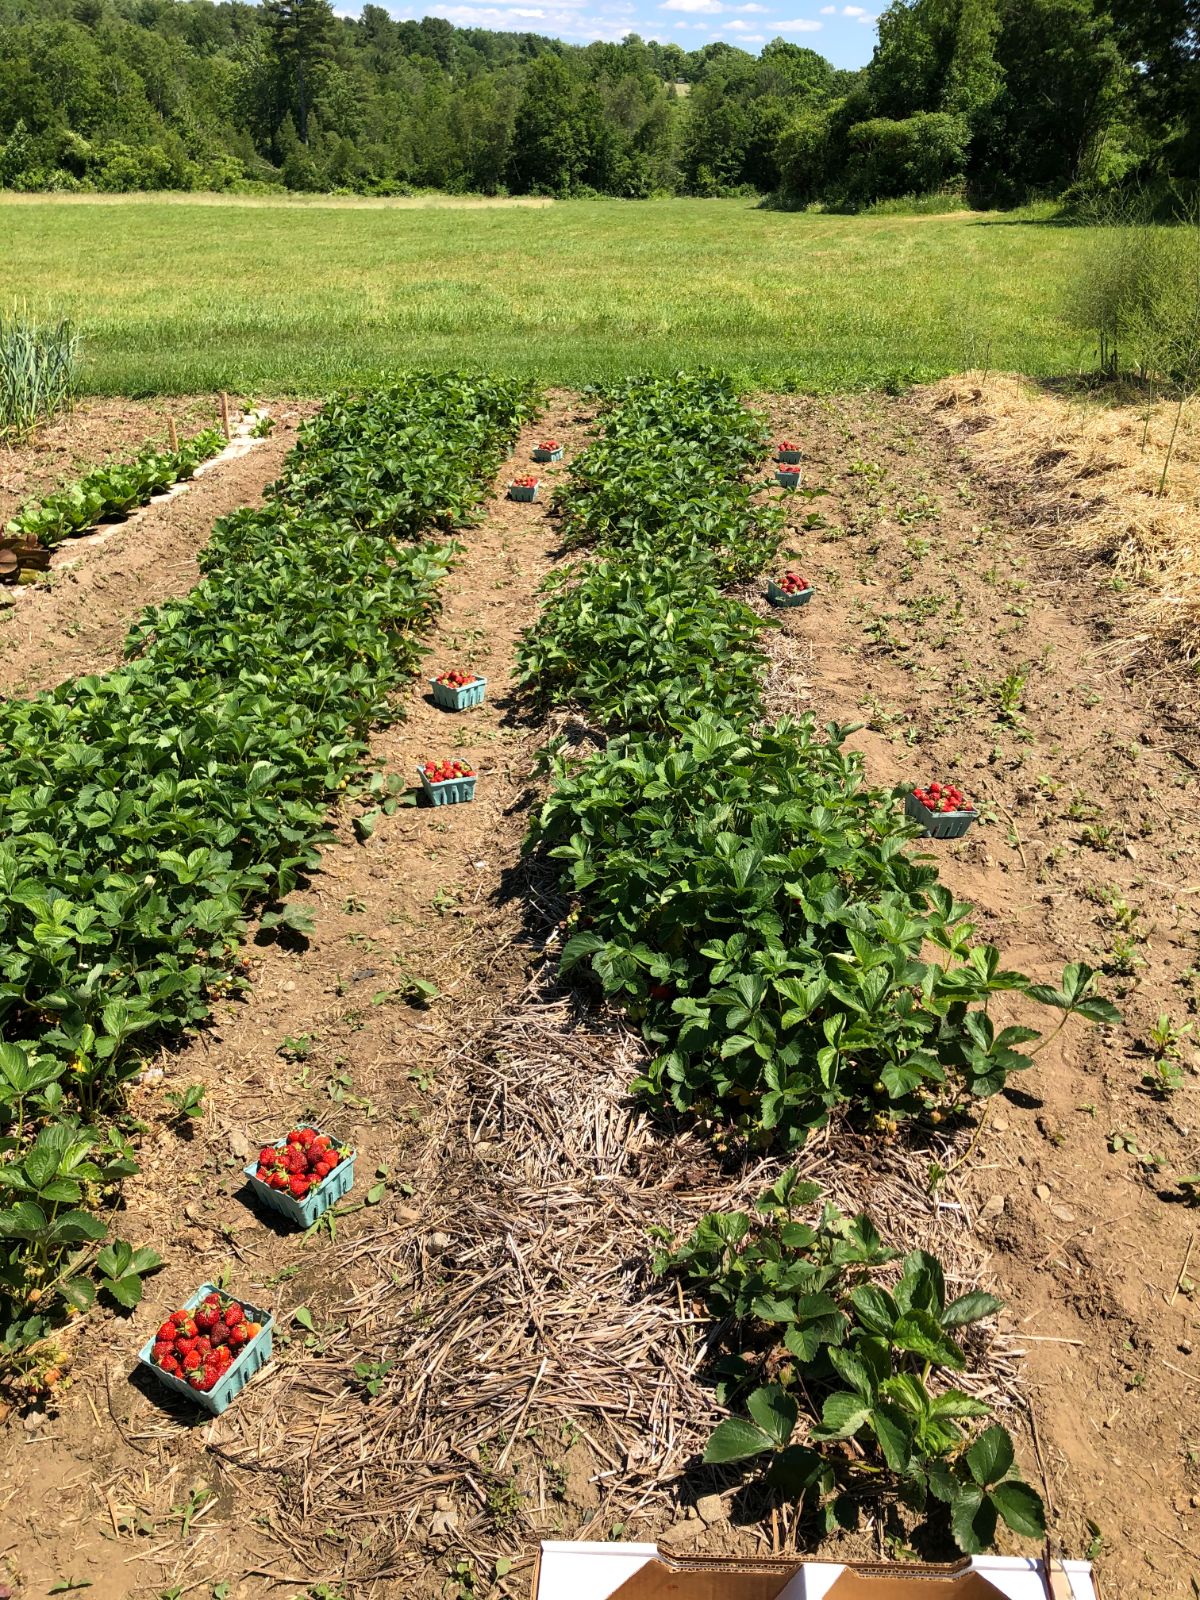 Boxes of freshly picked strawberries in a row.